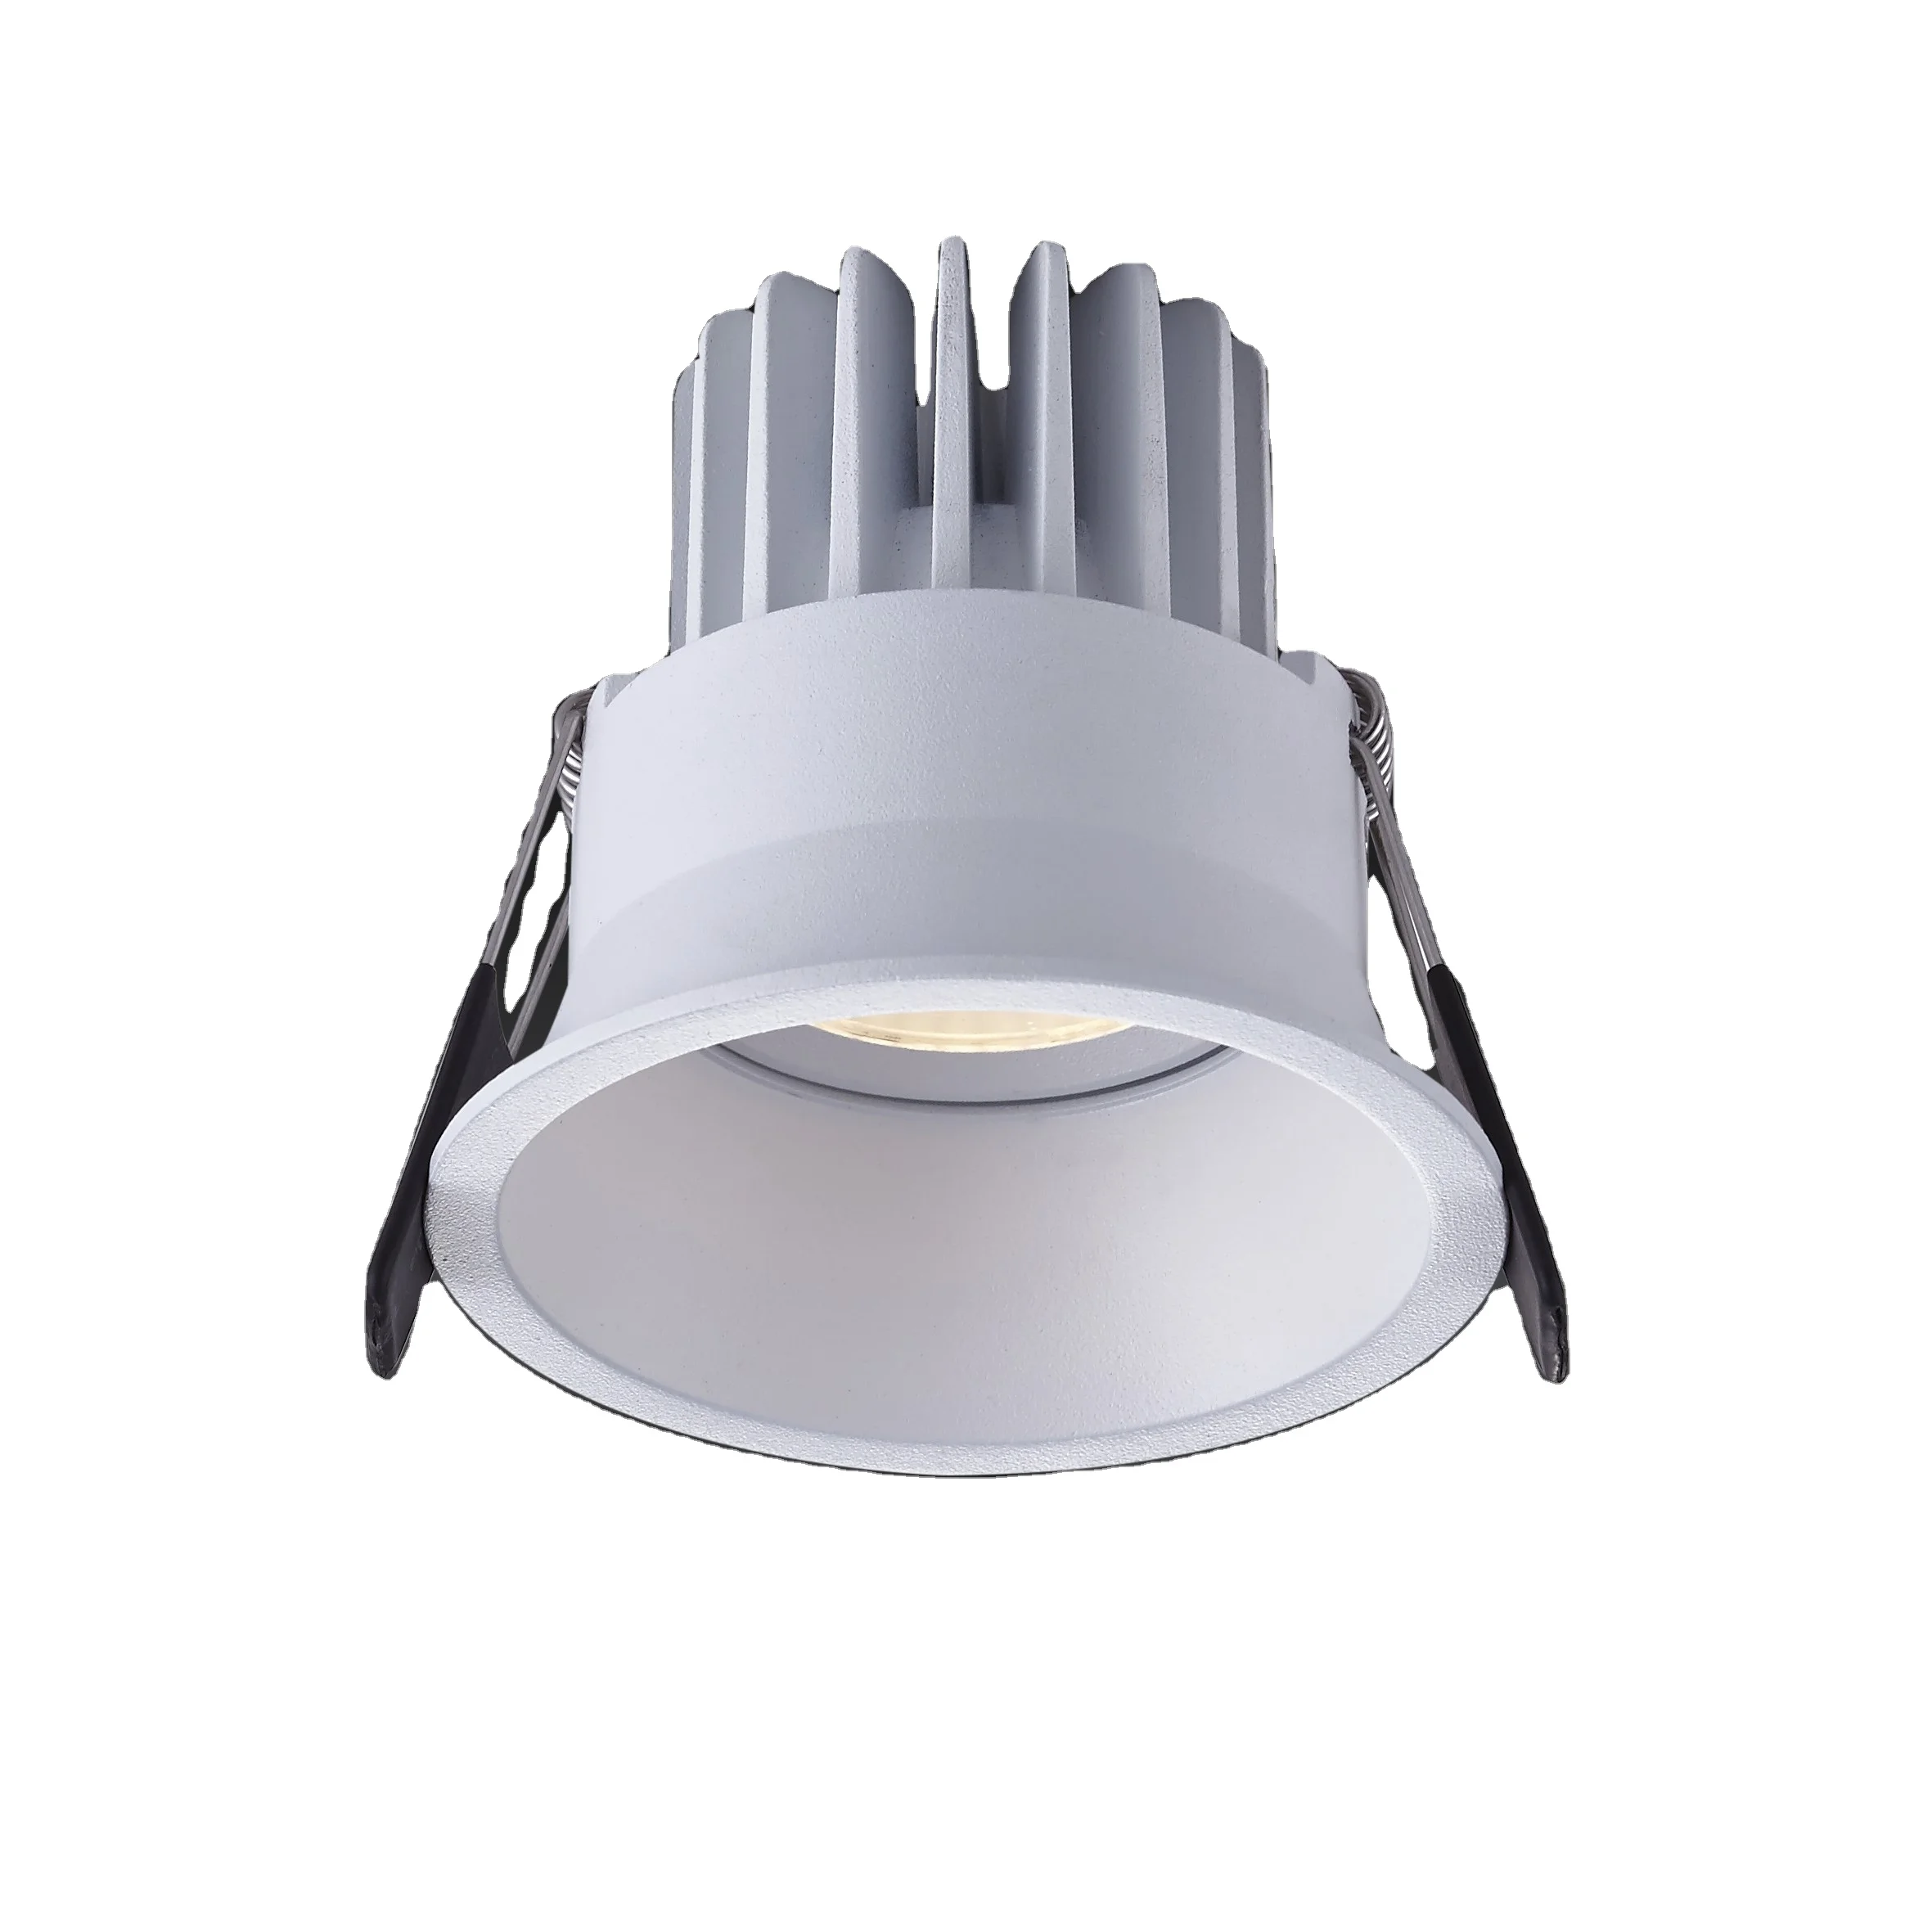 Factory Directly supply high quality LED ceiling spot light commercial lighting adjustable led down light